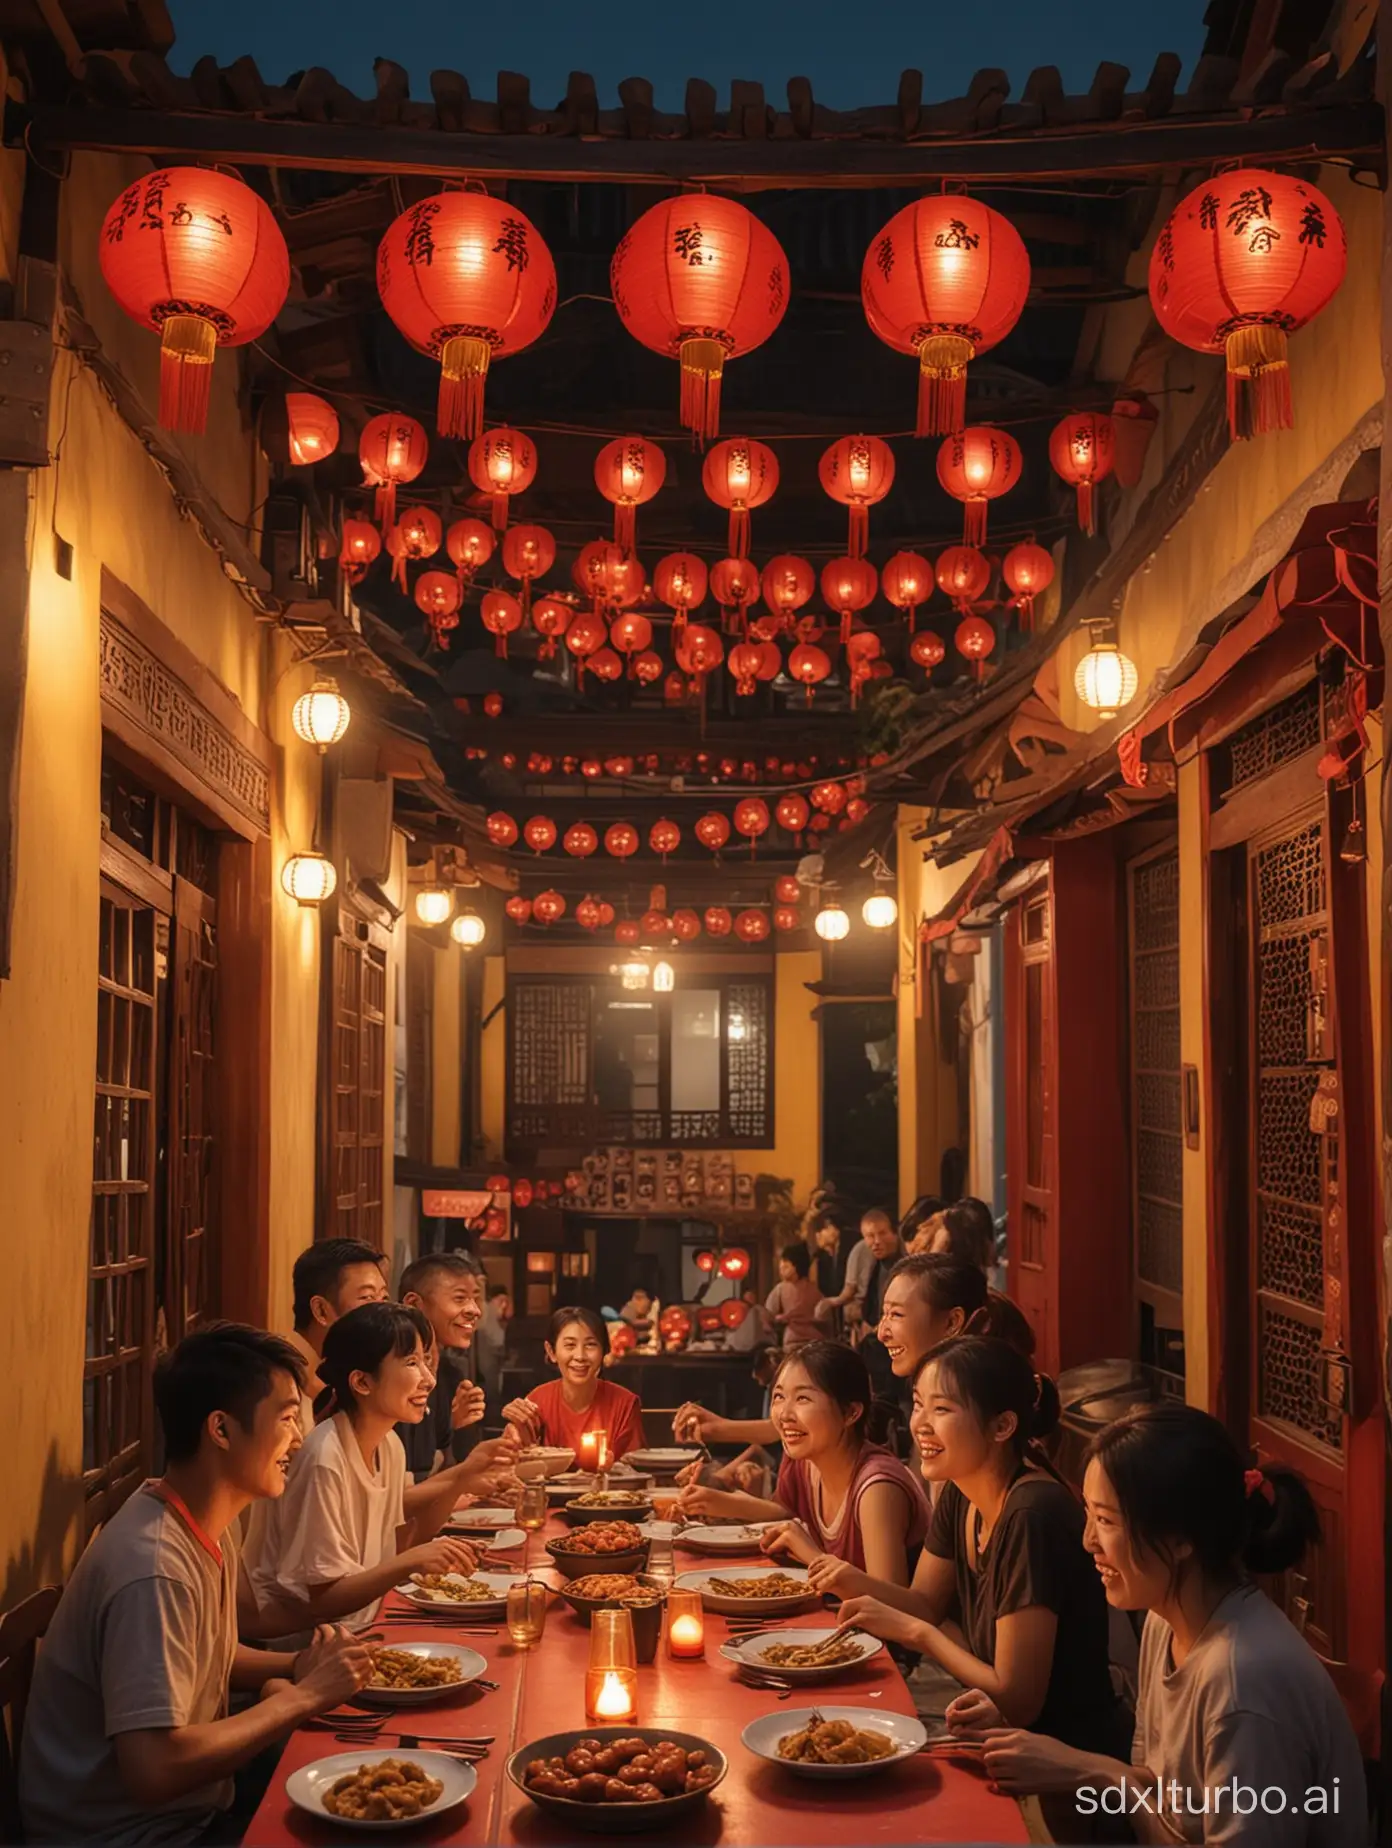 At night, 10 men, women, children, and elderly people with Asian faces and happy smiles, wearing ordinary T-shirts and trousers, gathered around a red round table and ate sumptuous dishes, in the style of movie stills, Retro style, warm picture makes people feel warm, distant view, warm yellow light lights up the surroundings, in the courtyard of the traditional Minnan style building, red lanterns are hung on the eaves, and cooking smoke rises from behind, the depth of field highlights the characters facial expression.